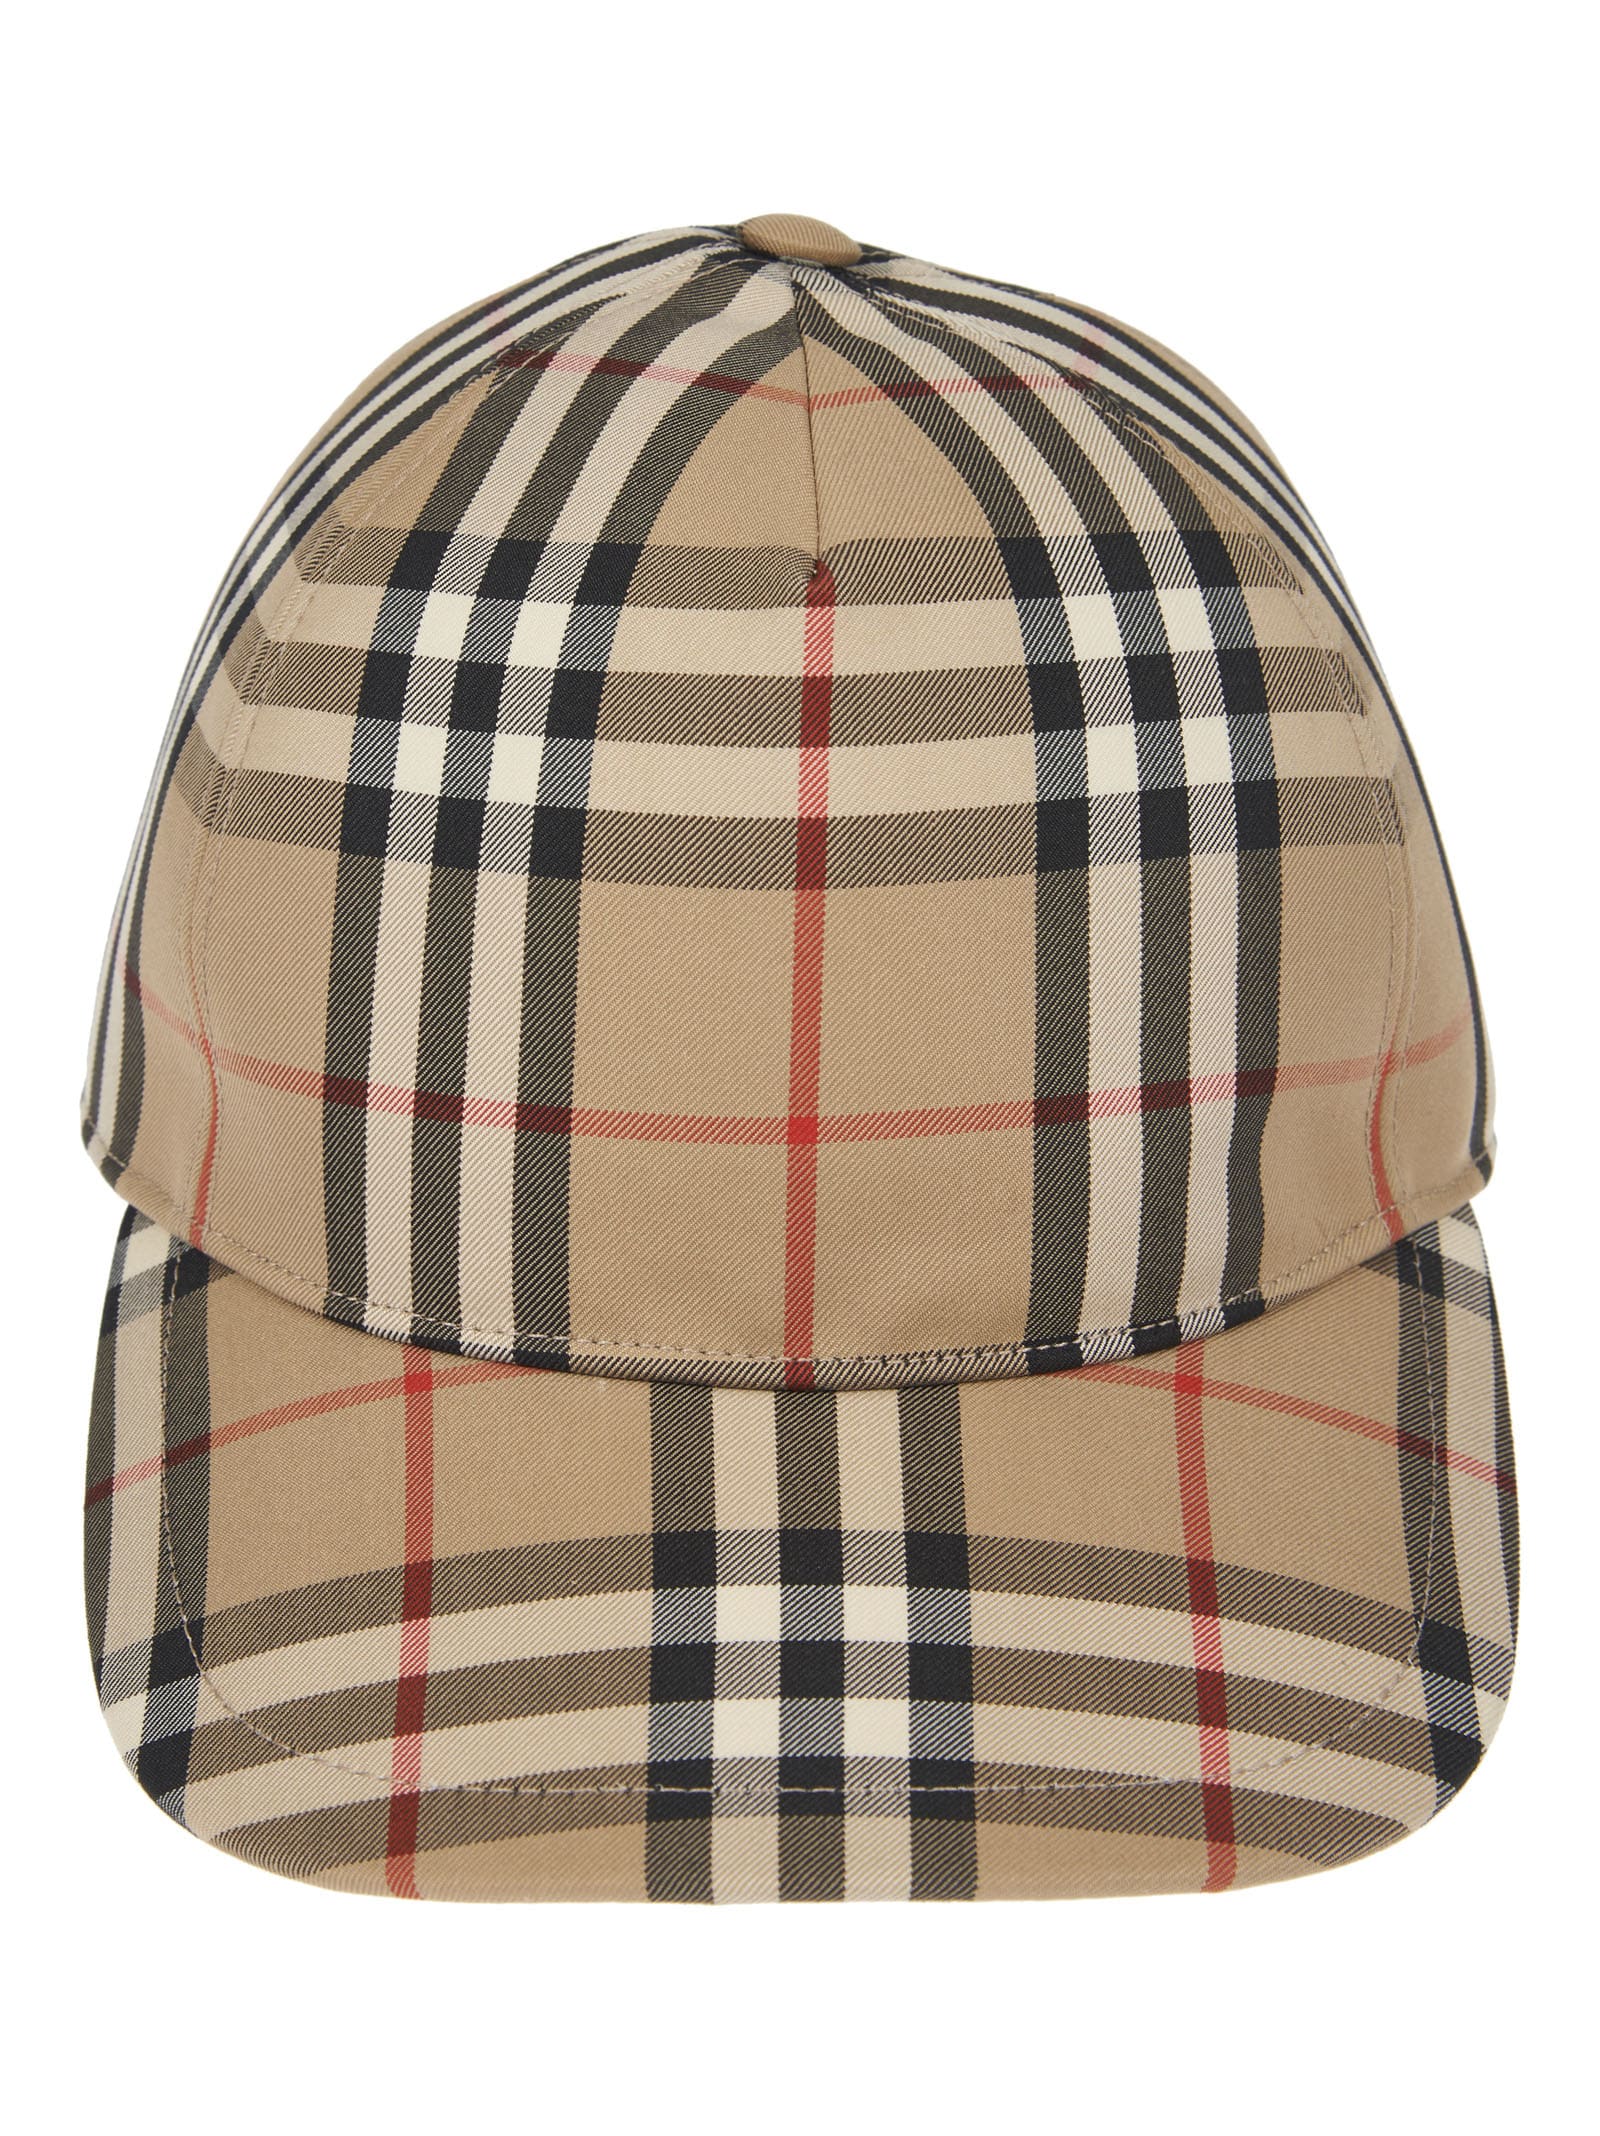 Burberry House Check Cap In Archive Beige